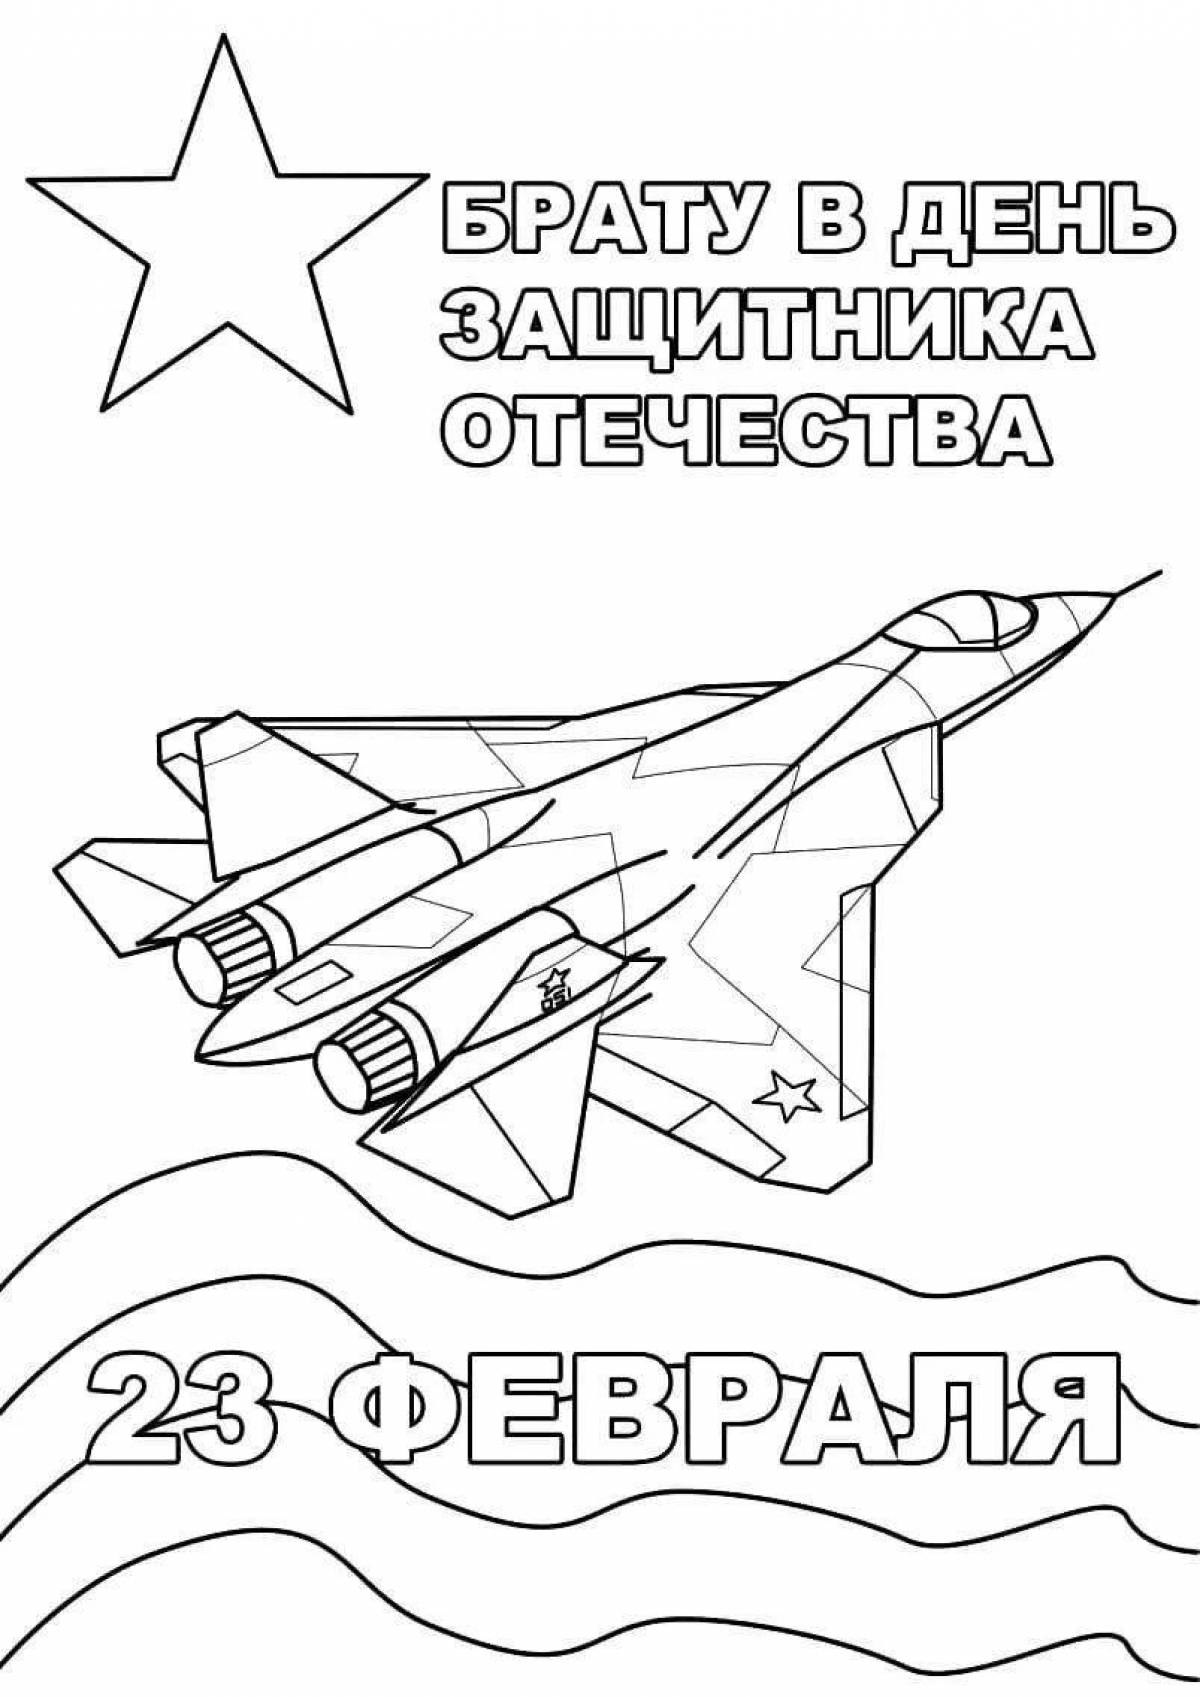 For February 23, Defender of the Fatherland Day for children #12